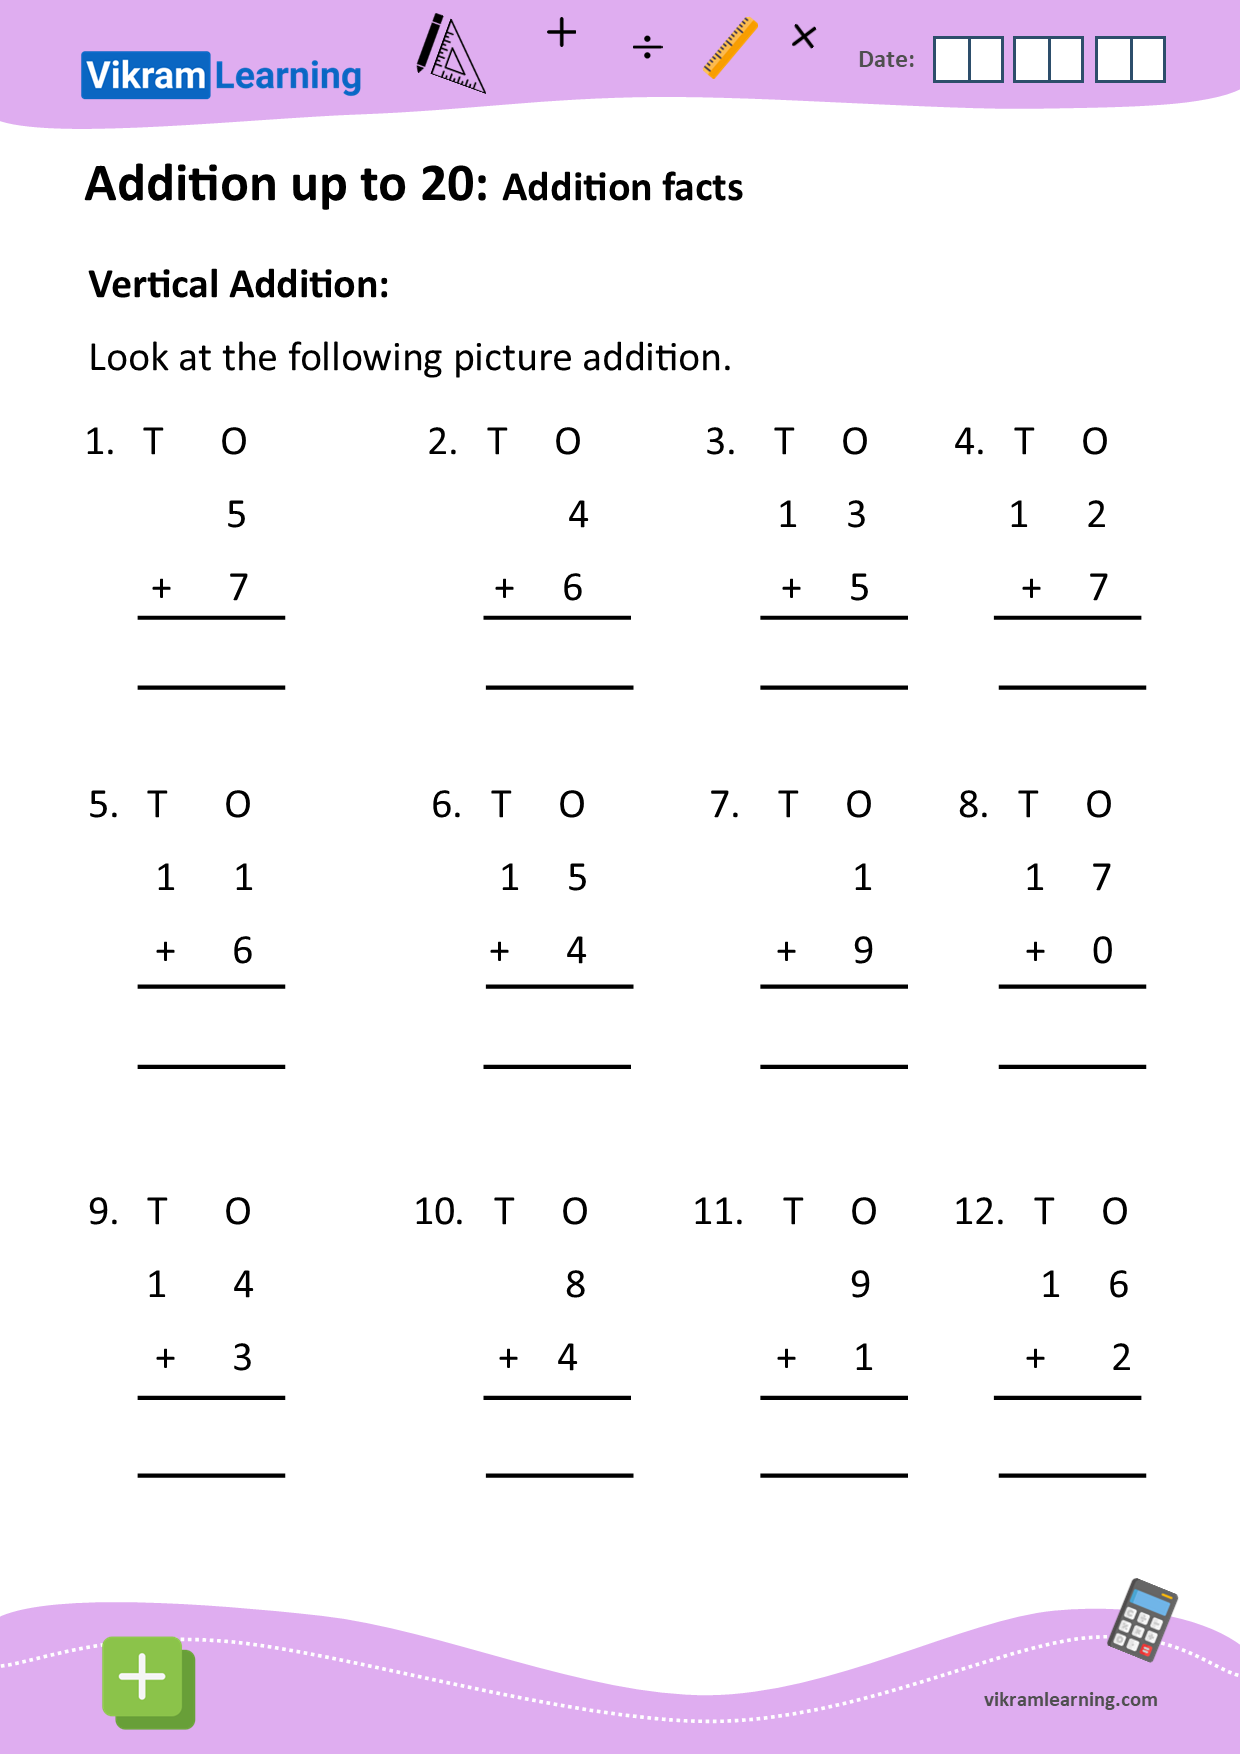 Download addition up to 20 using vertical addition worksheets